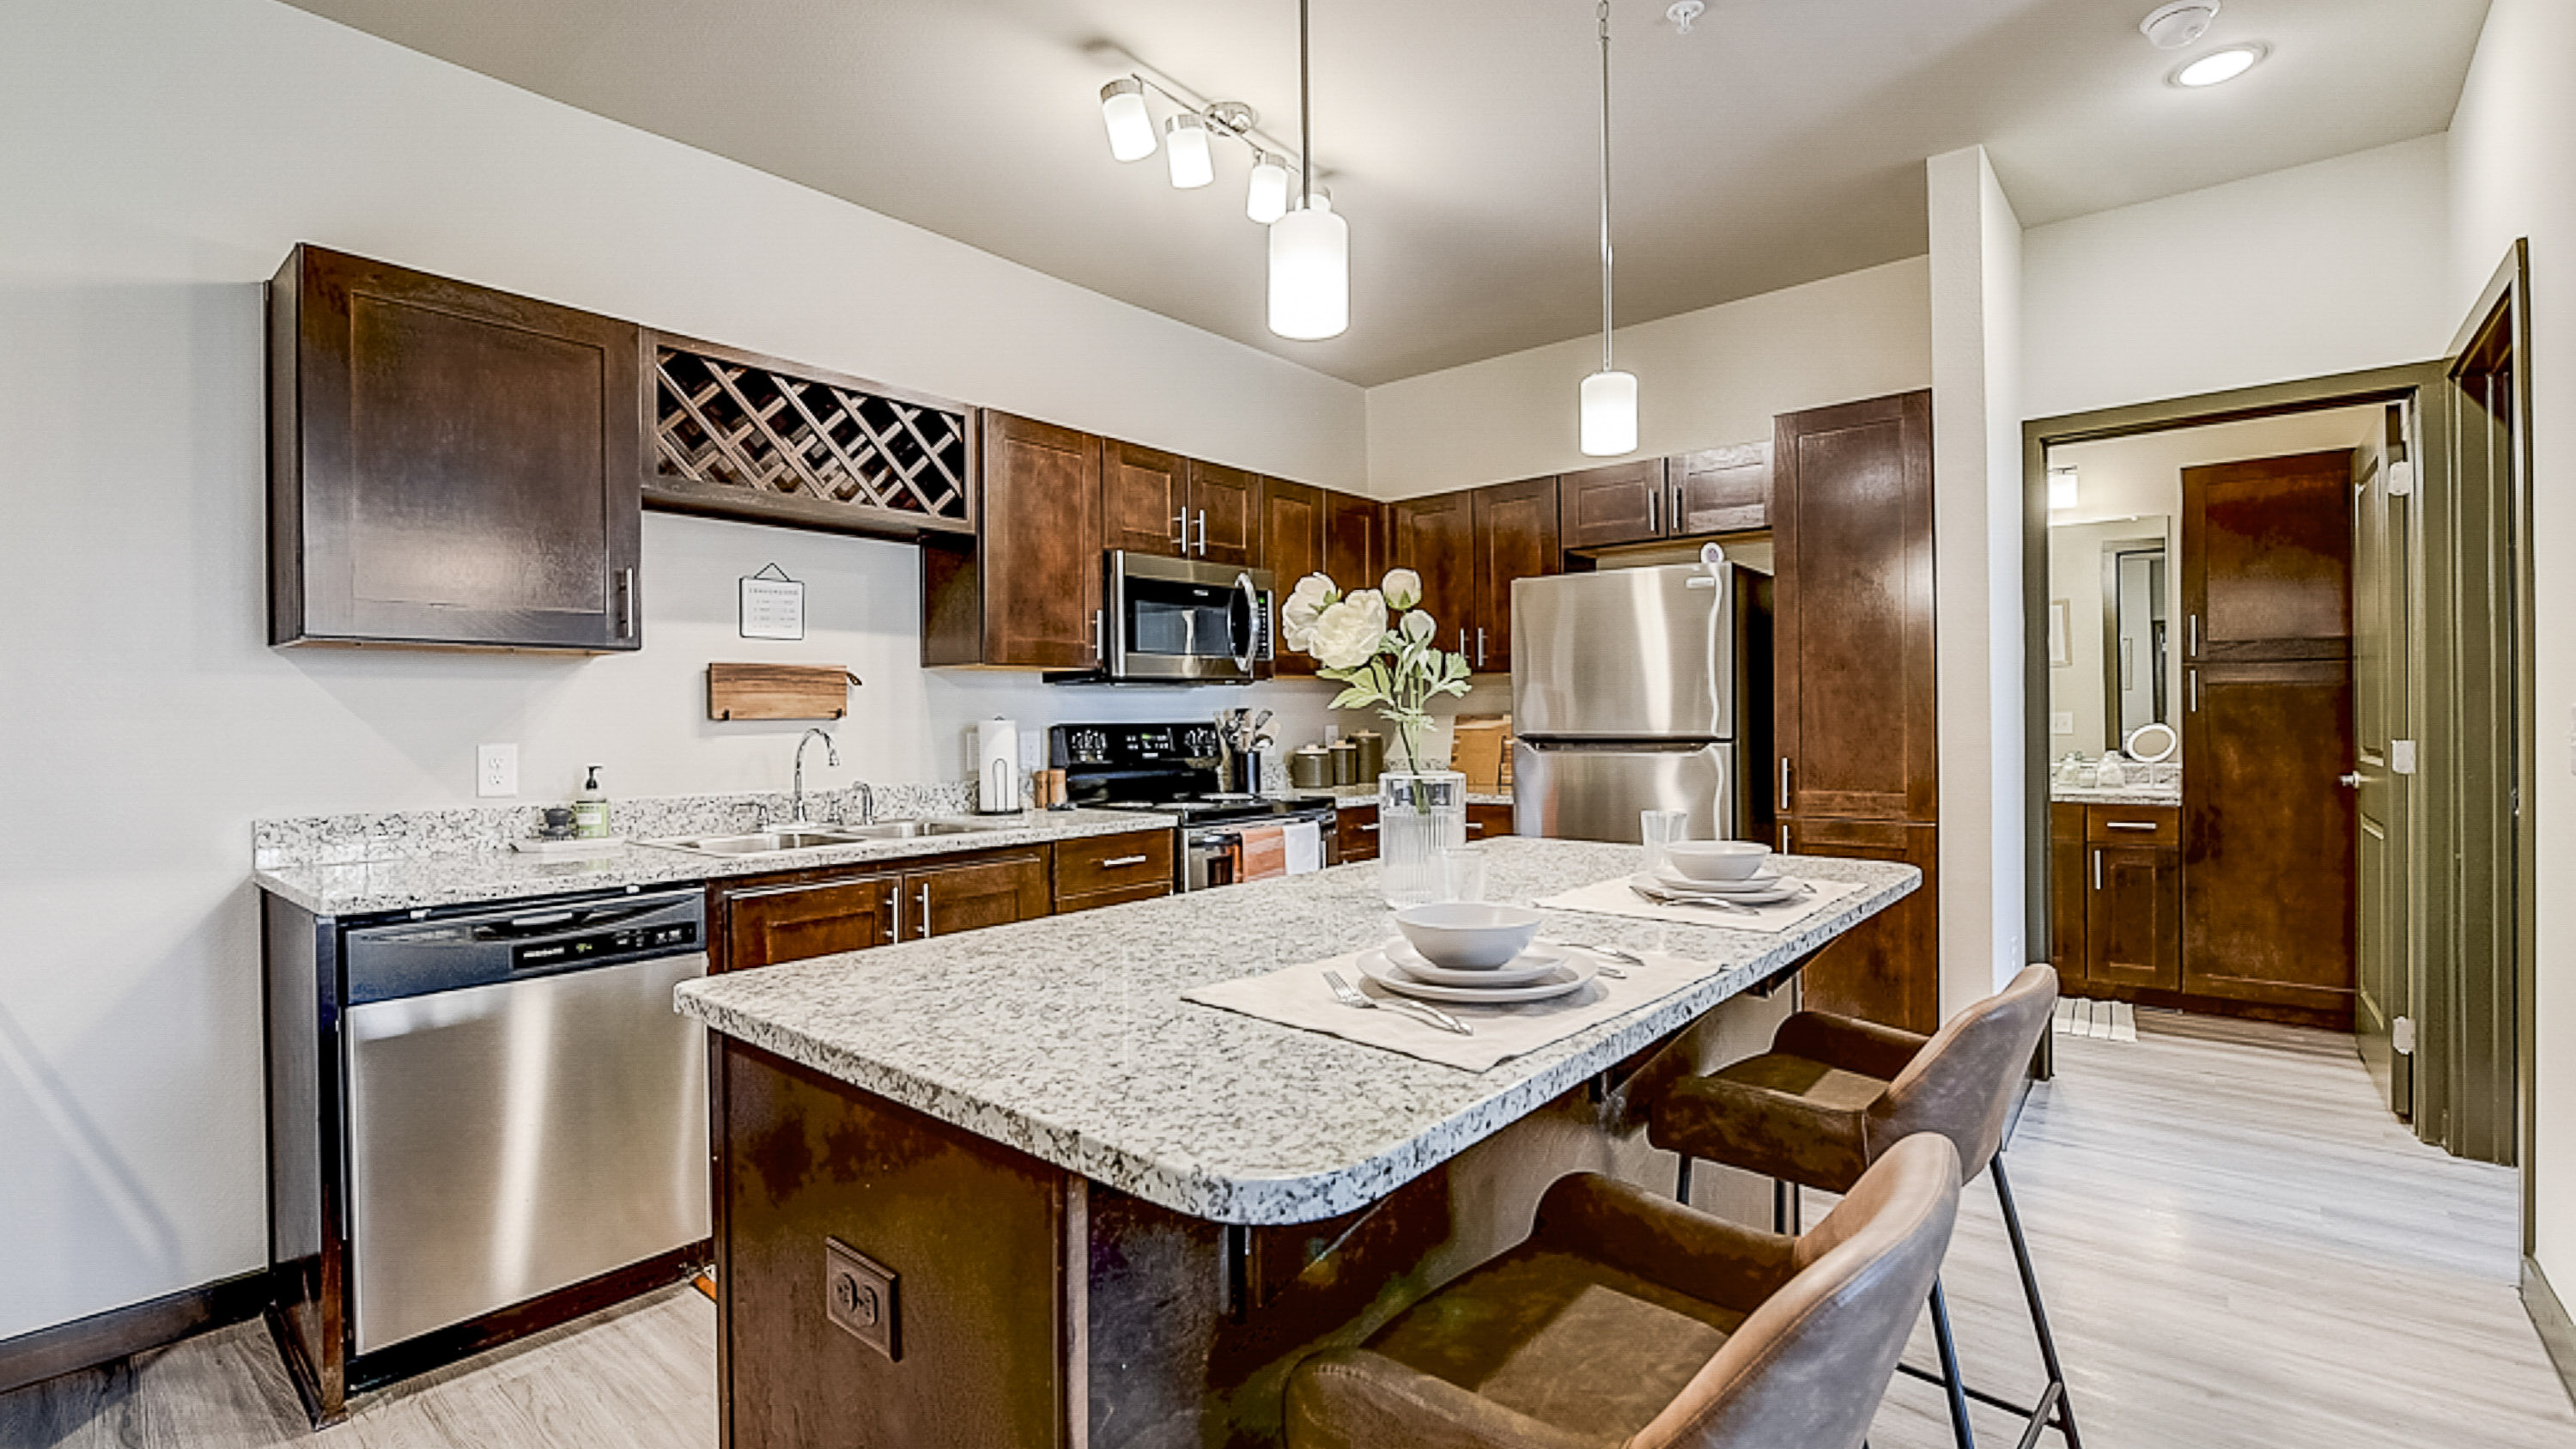 Stainless Steal appliances, granite counter tops, wine rack, and brown wood cabinets at Springs at Grand Prairie apartments in Texas